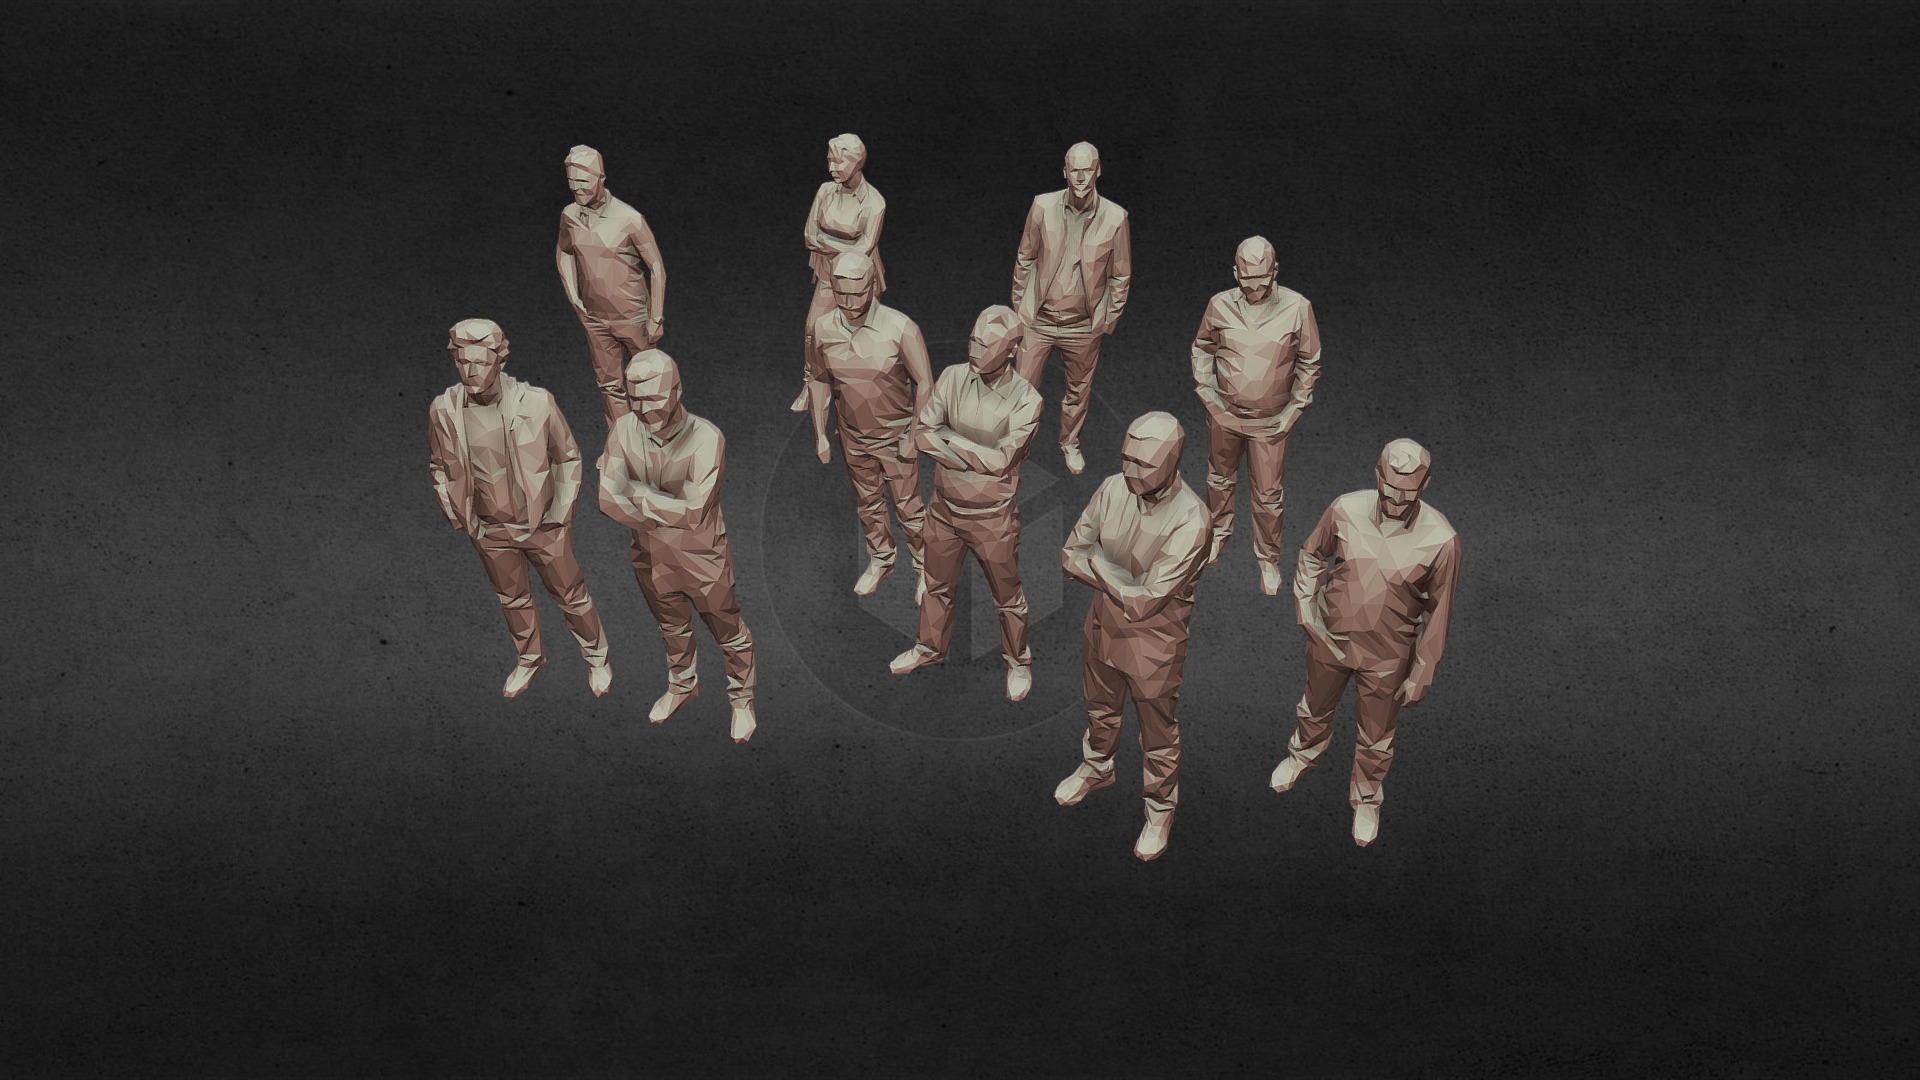 3D model 10 Low Poly People Pack Volume 1 - This is a 3D model of the 10 Low Poly People Pack Volume 1. The 3D model is about a group of men in white suits.